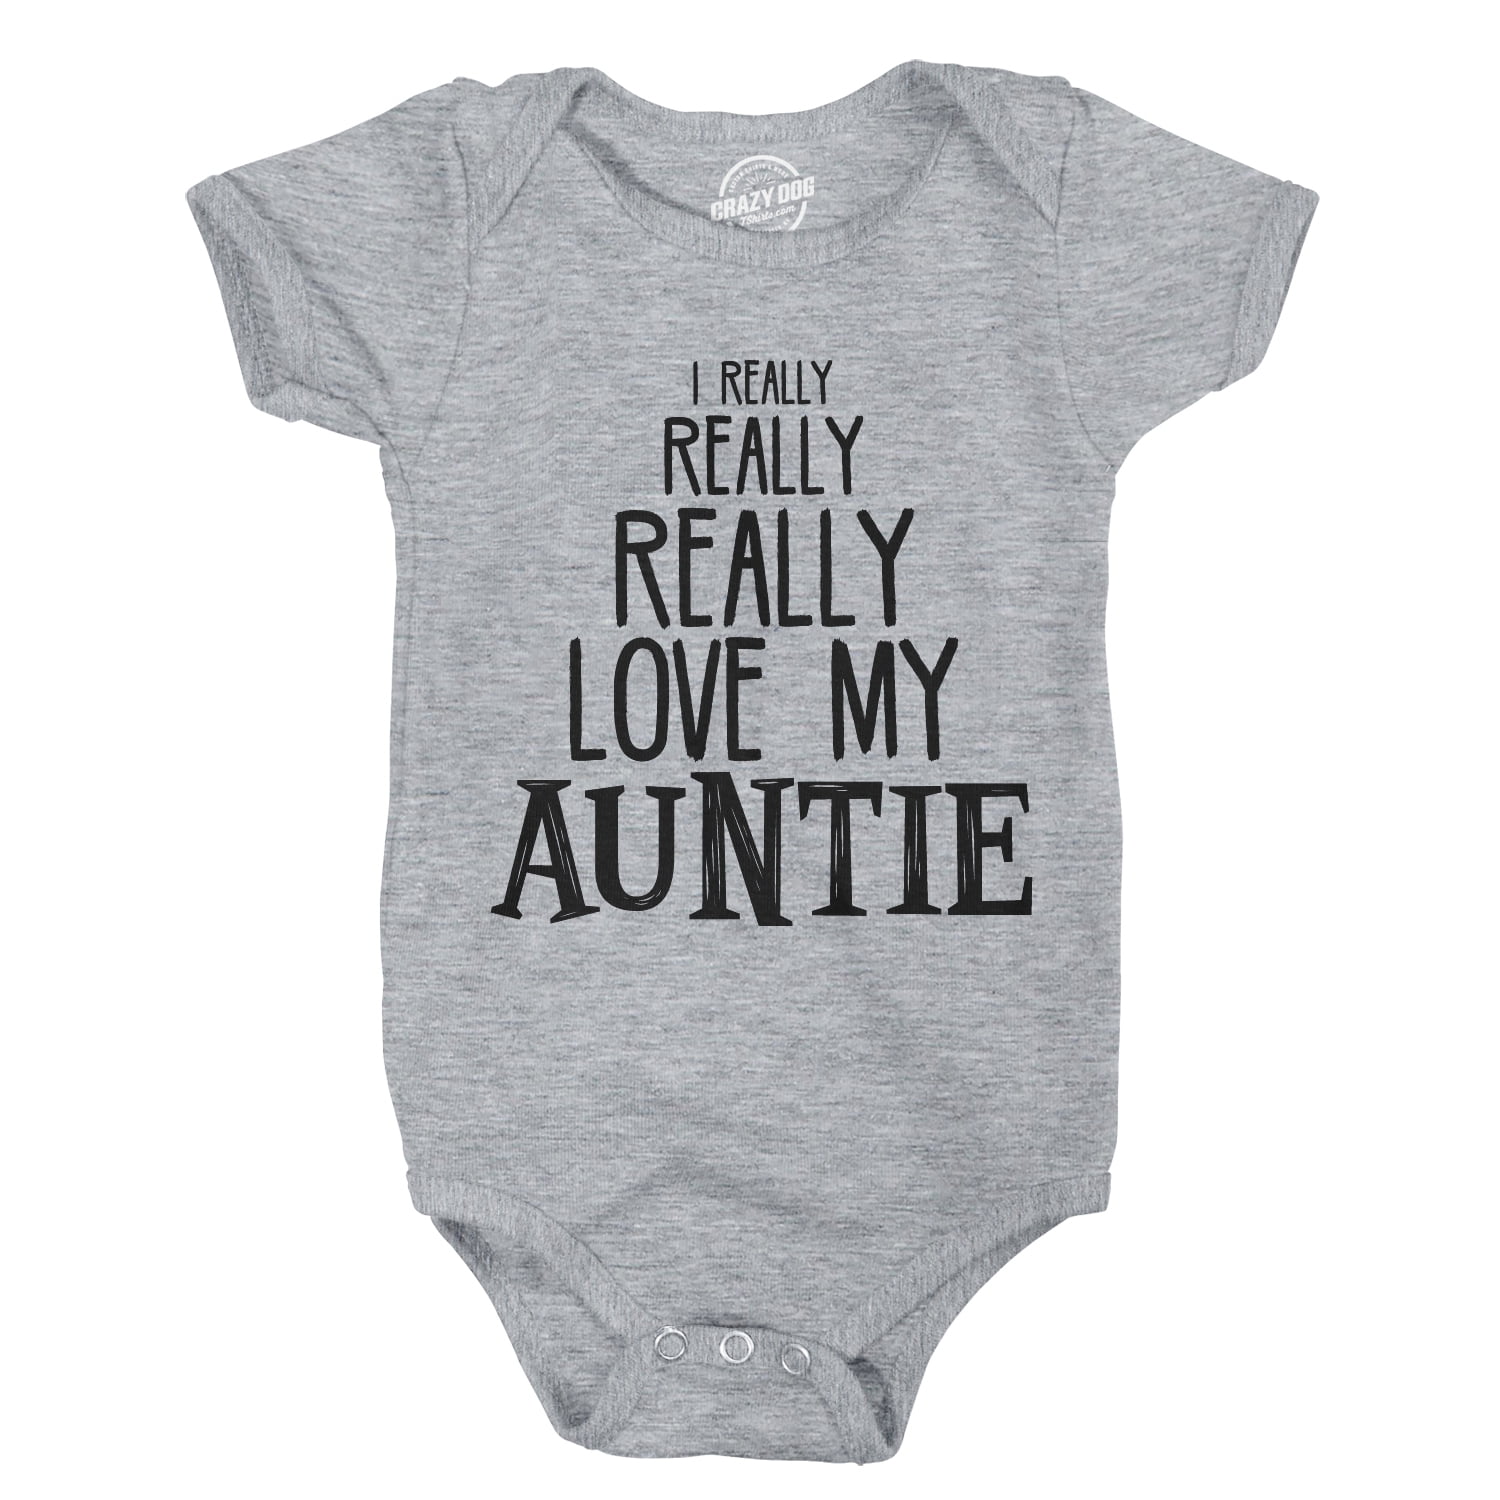 I LOVE MY AUNTIE ARROW PERSONALISED BABY TODDLER T SHIRT KIDS FUNNY GIFT CUTE 